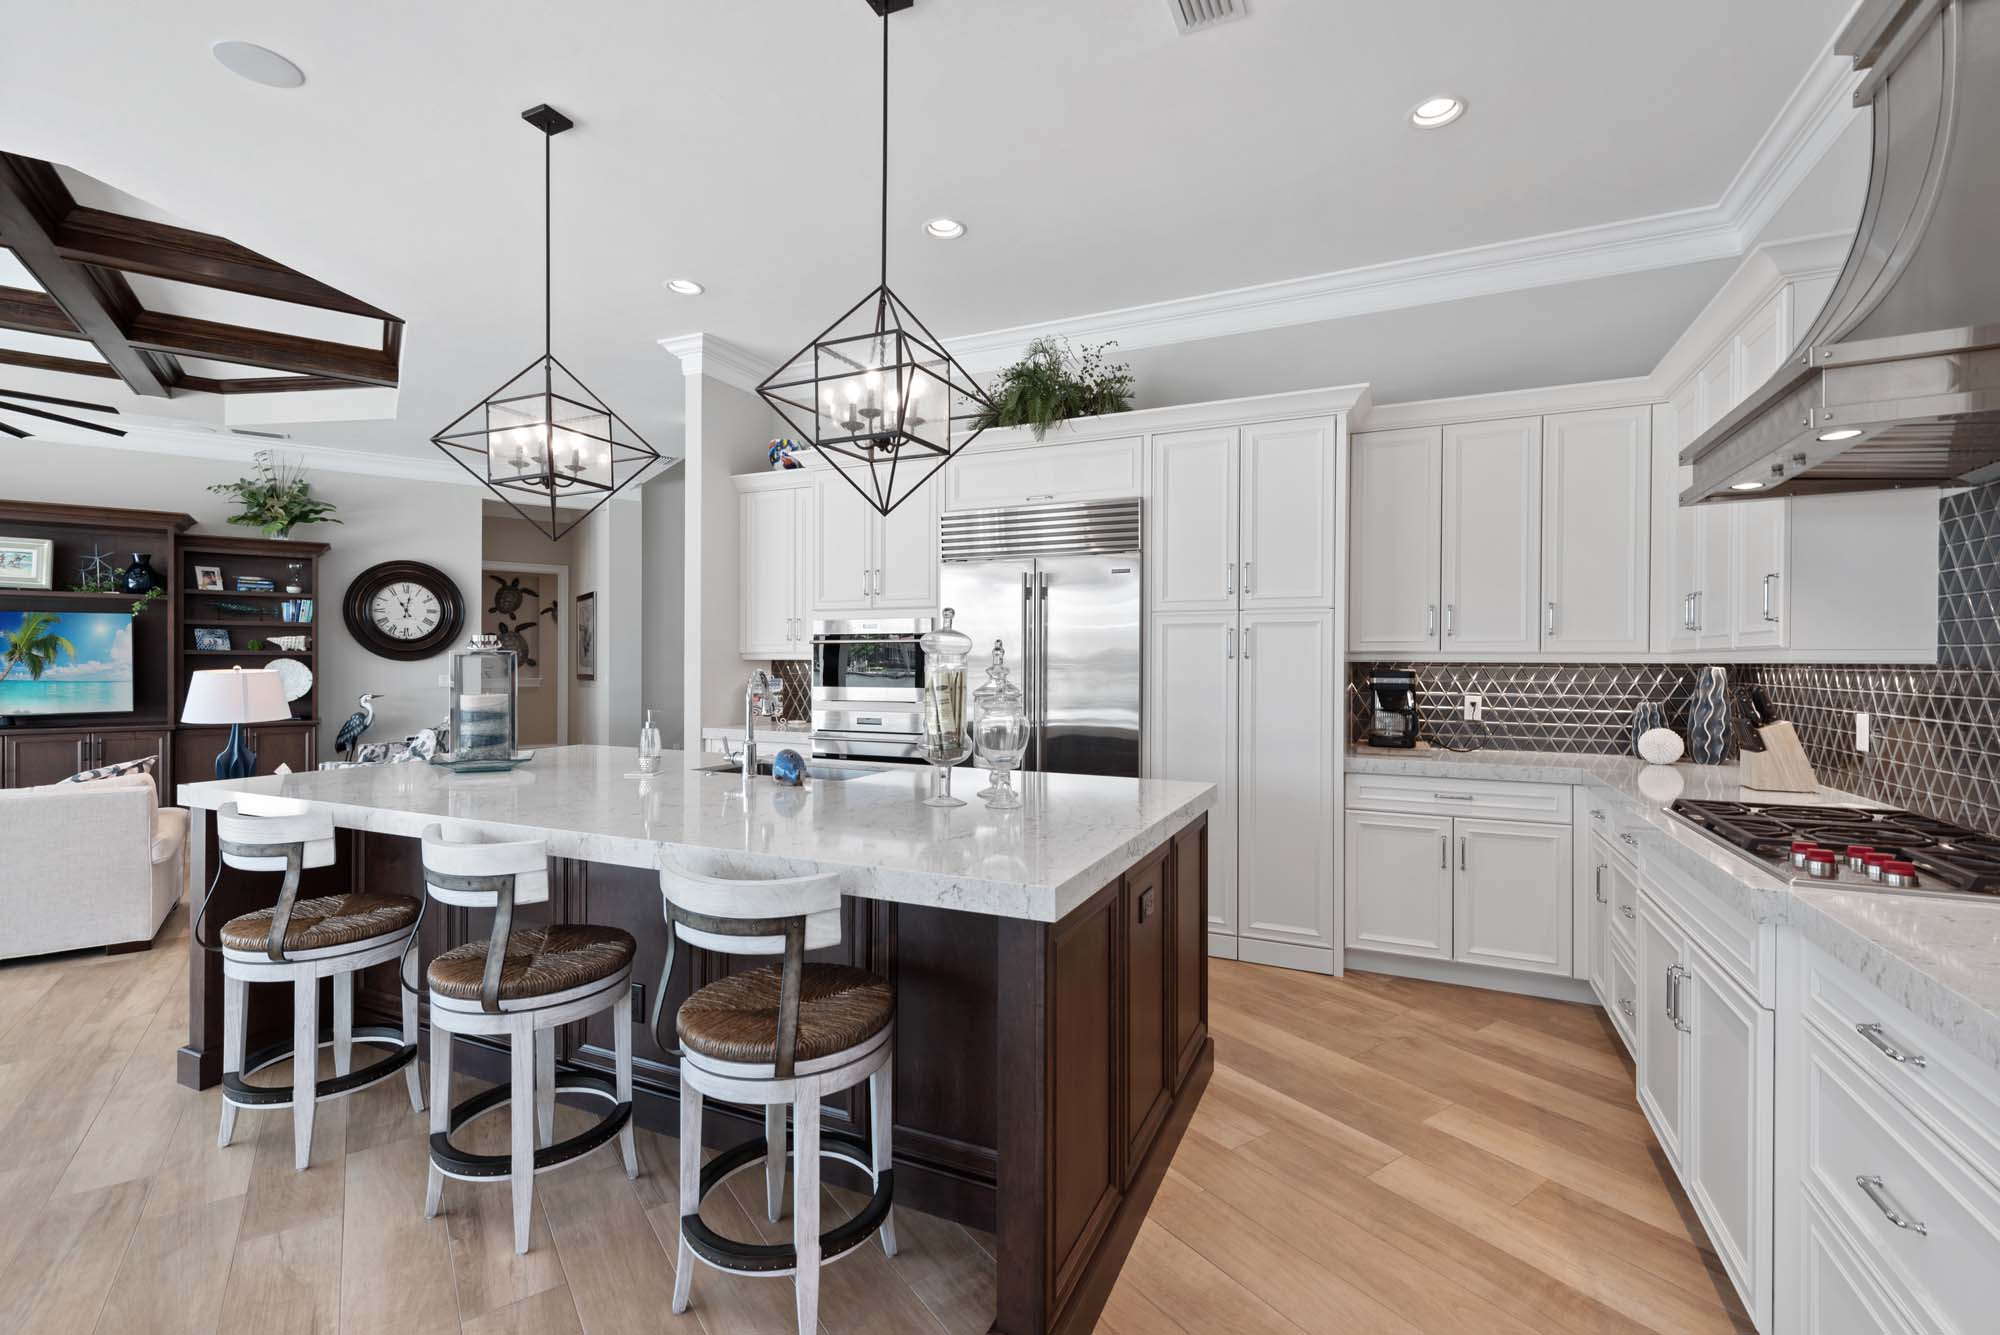 Image of a luxury kitchen to convey custom homes marco island